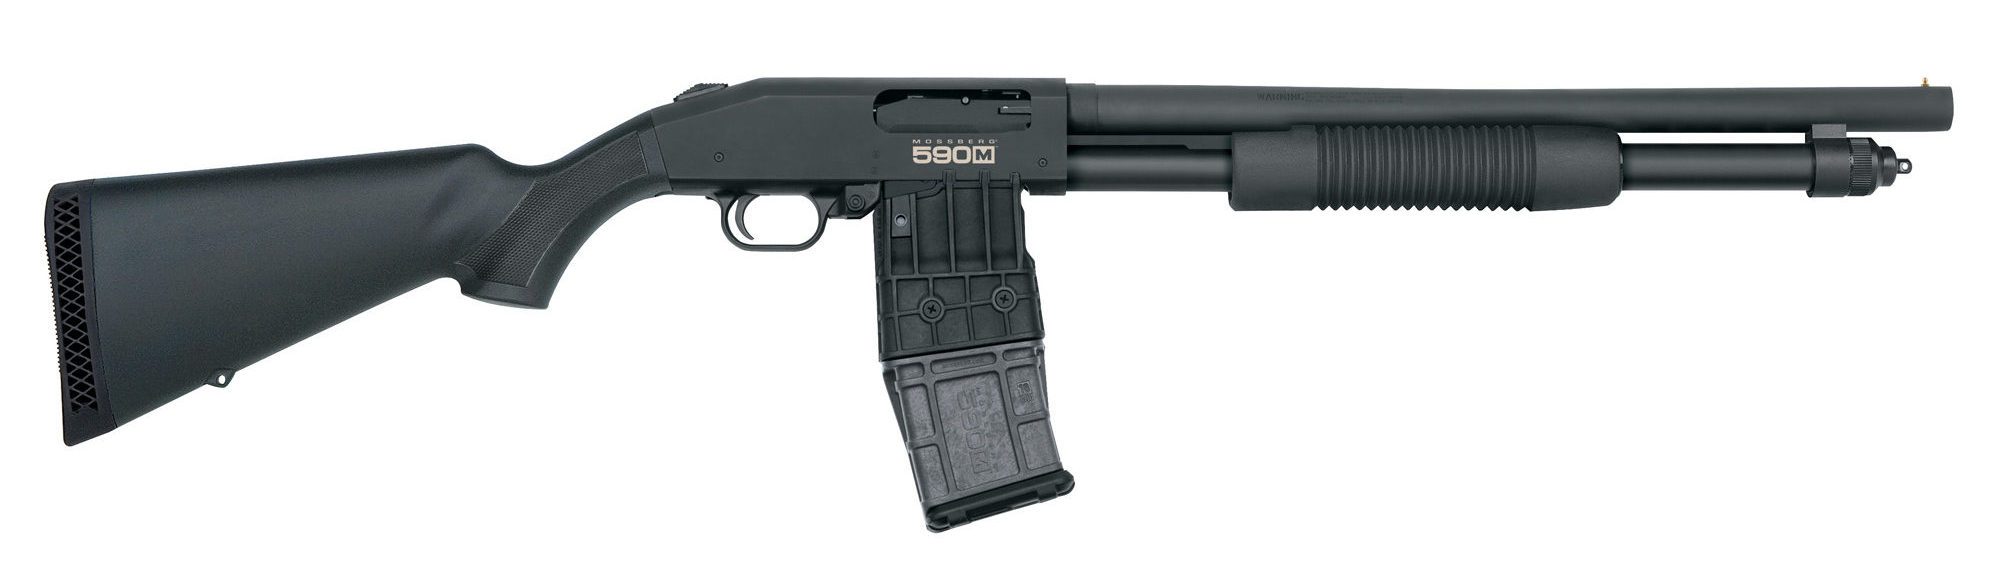 Mossberg 590m</br>12ga, 18.5", Blue, Synthetic, Right Hand, </br> Pump Action Shotgun</br>10 Round Mag</br>